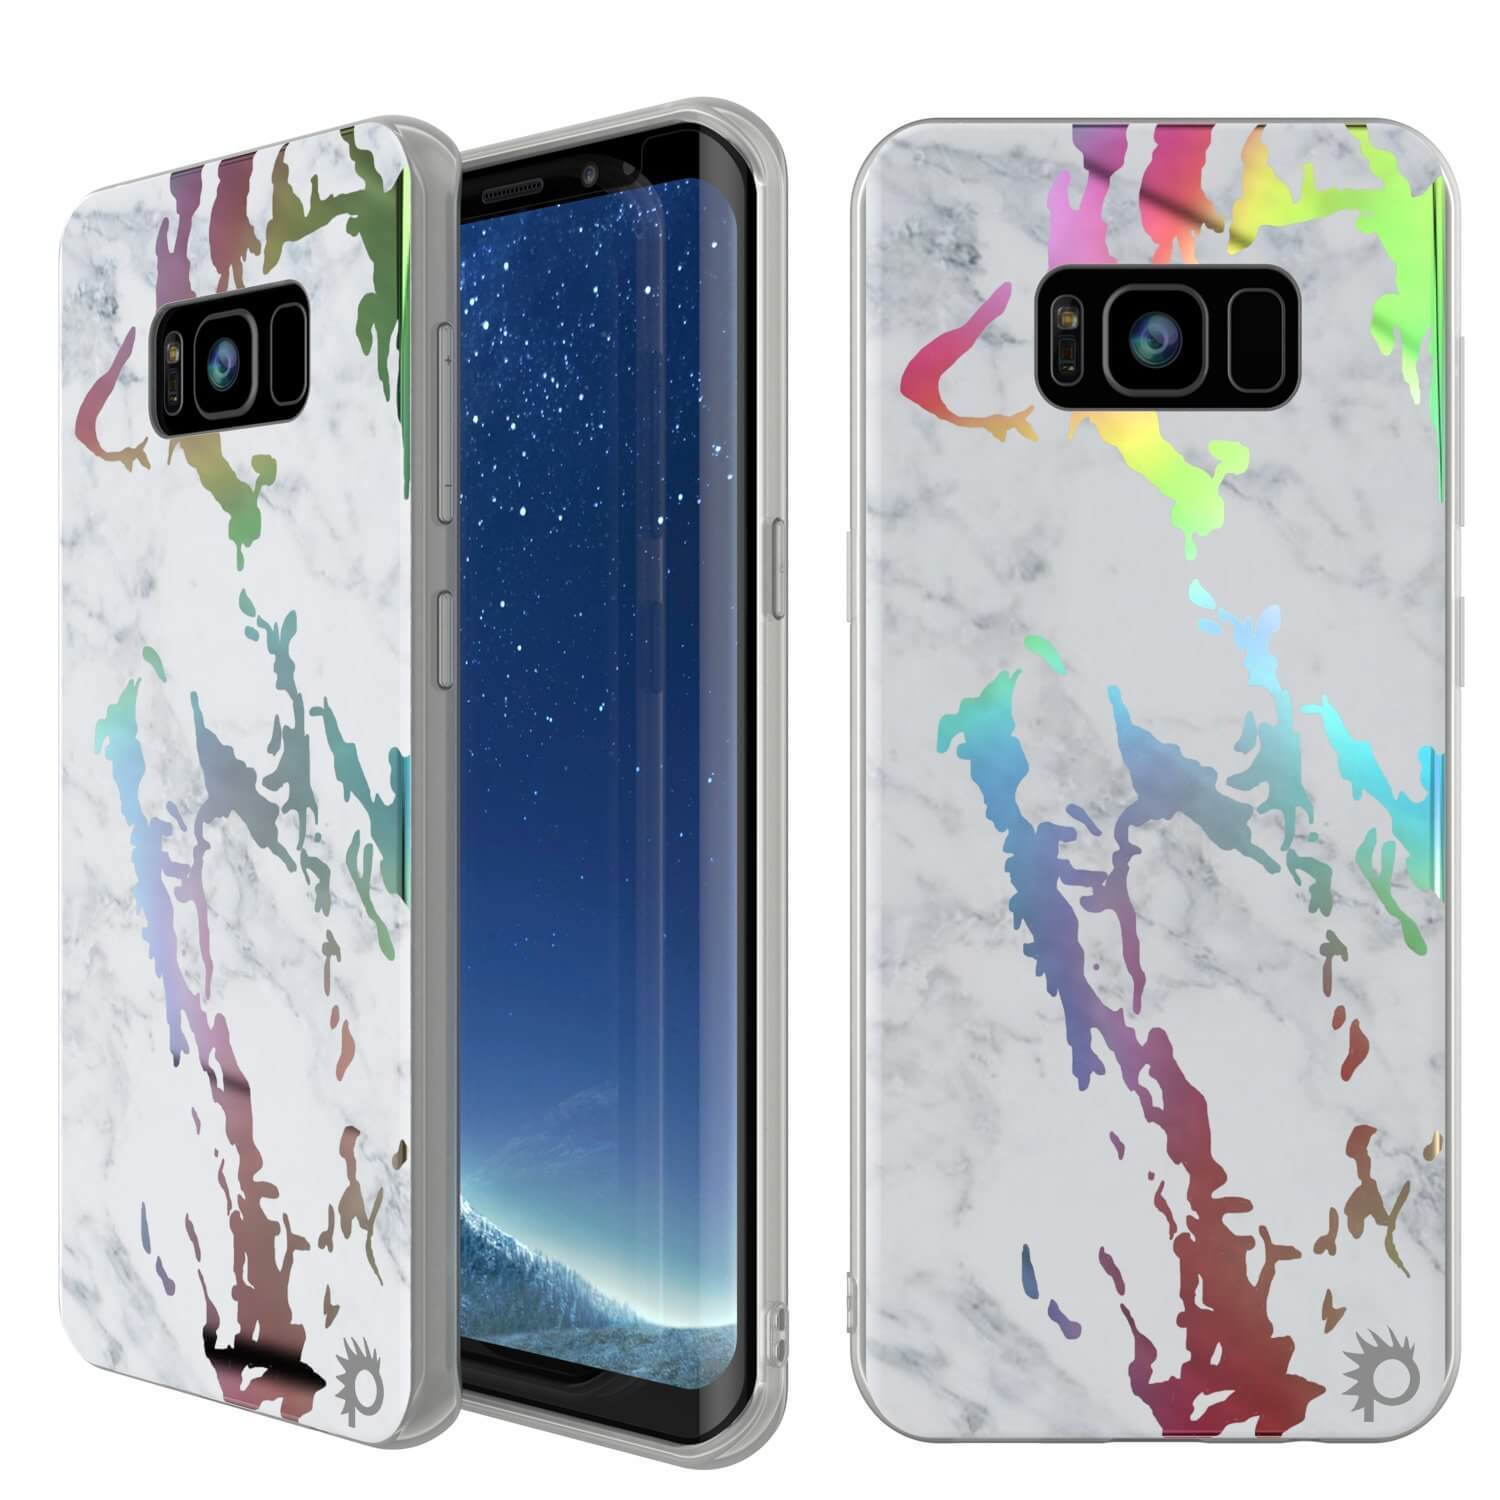 Punkcase Galaxy S8+ PLUS Marble Case, Protective Full Body Cover W/PunkShield Screen Protector (Blanco Marmo) - PunkCase NZ